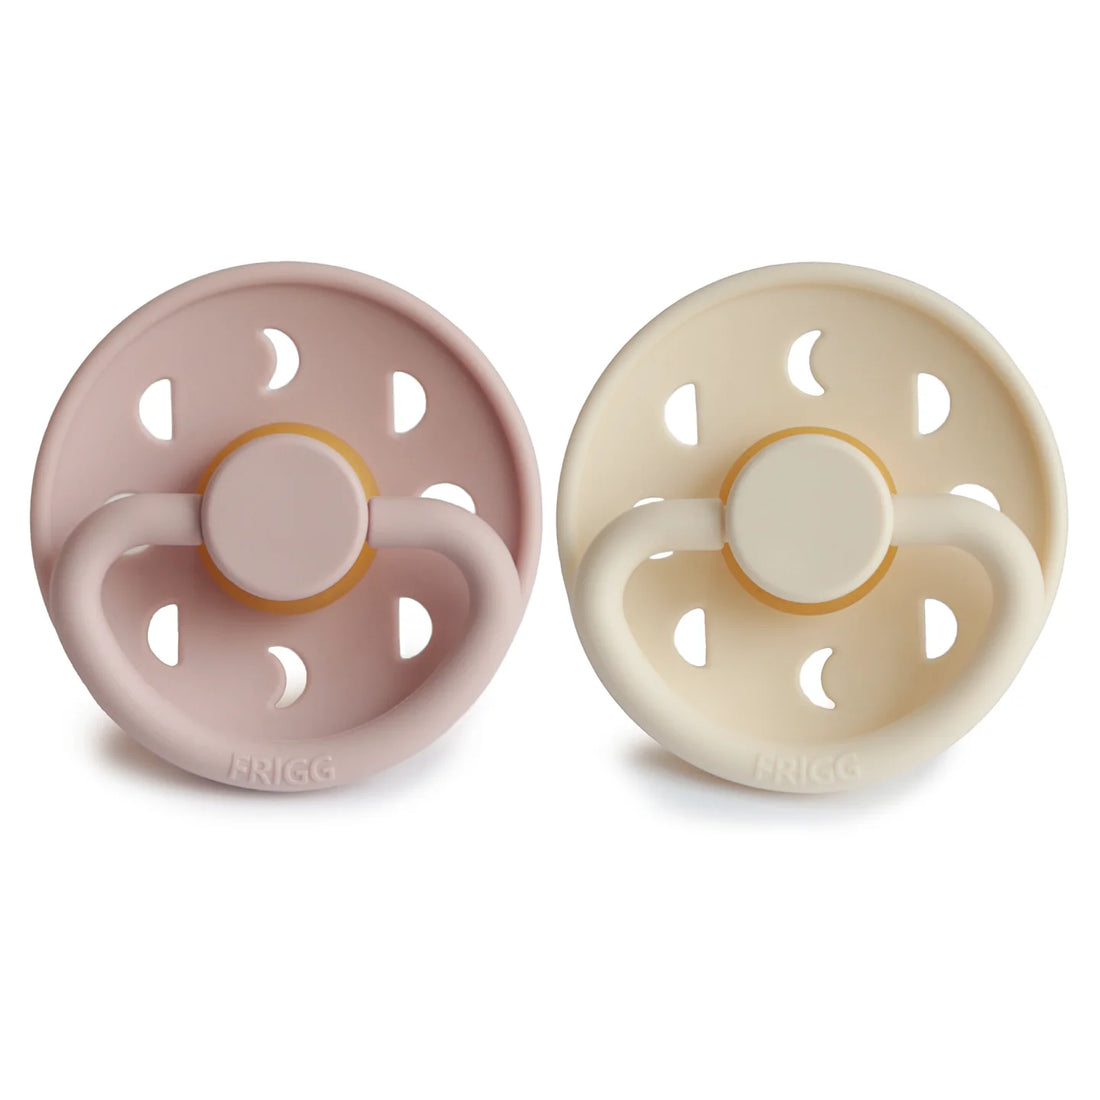 FRIGG MOON NATURAL RUBBER PACIFIER | BLUSH/CREAM | 2 PACK